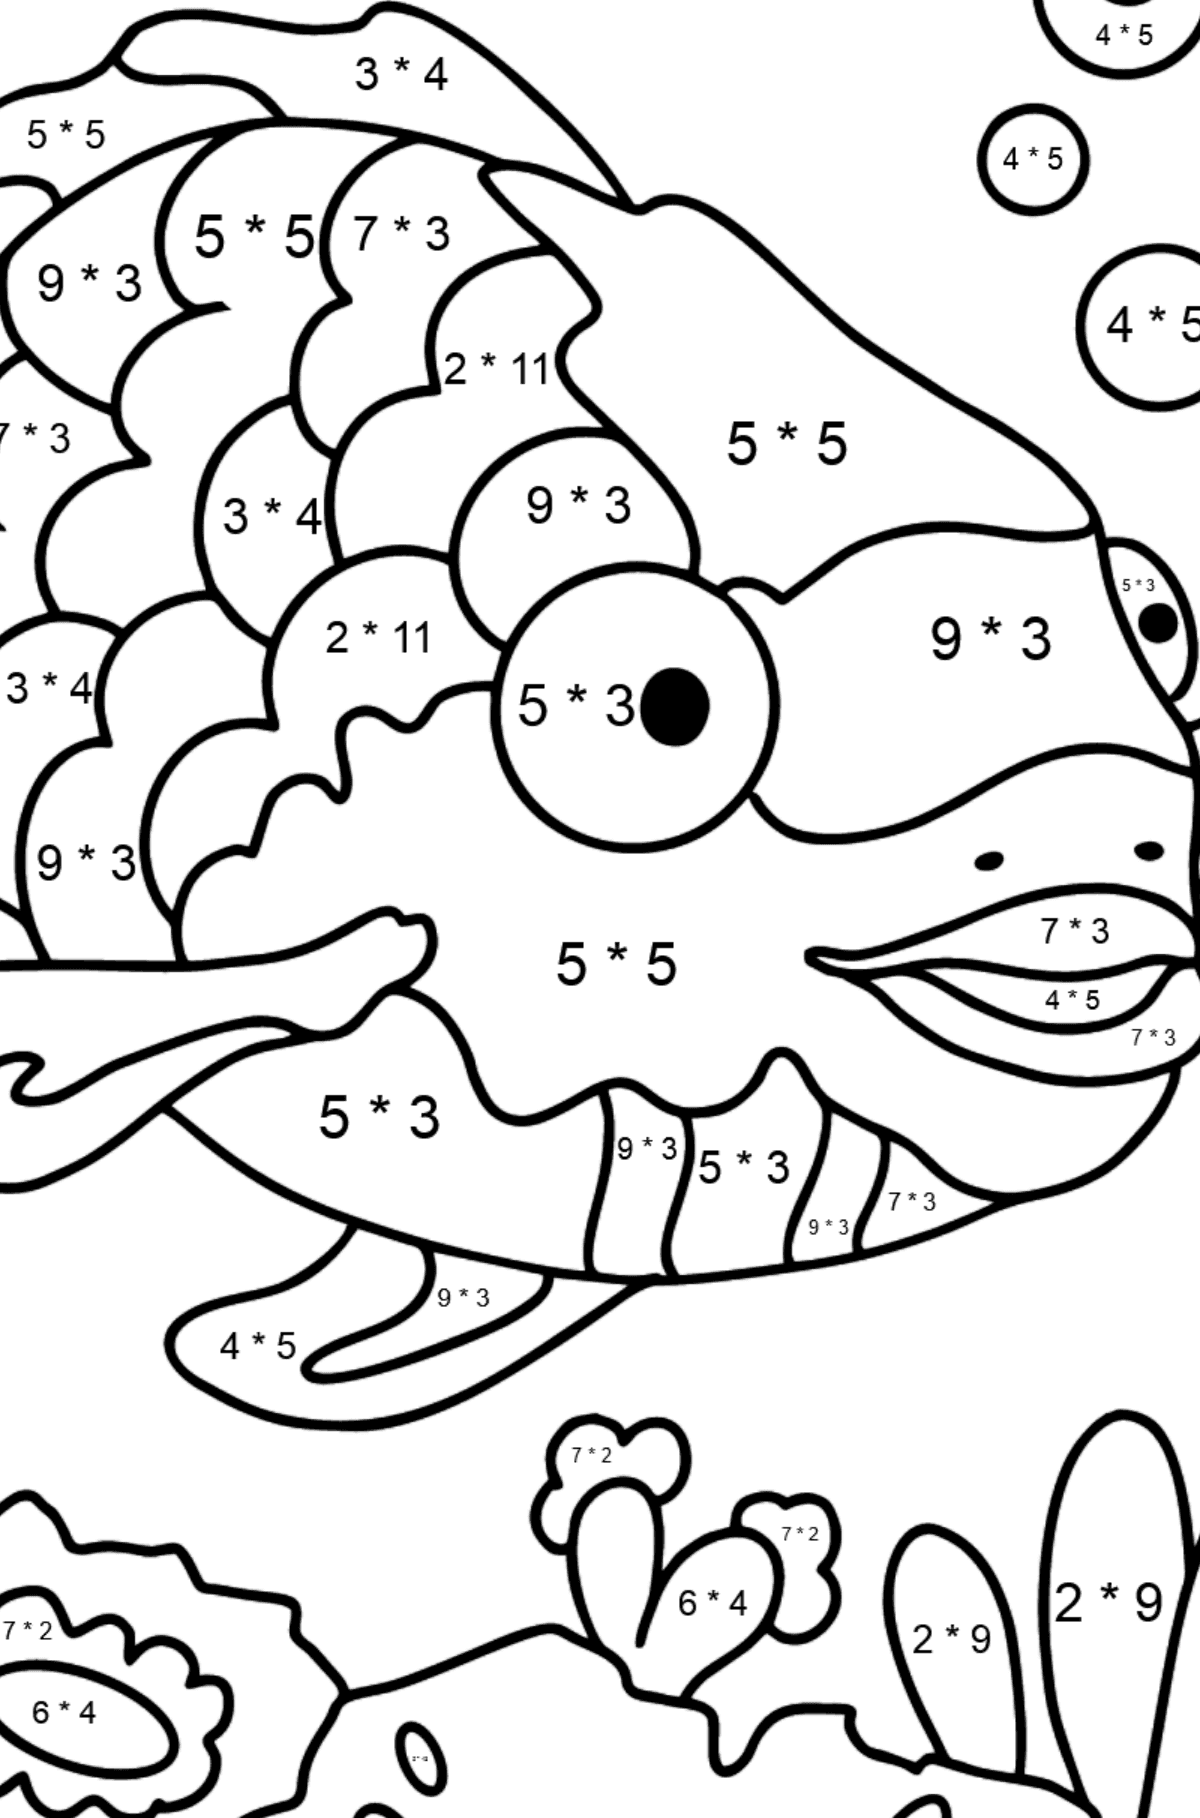 Coloring Page - An Exotic or Rainbow fish - Math Coloring - Multiplication for Kids